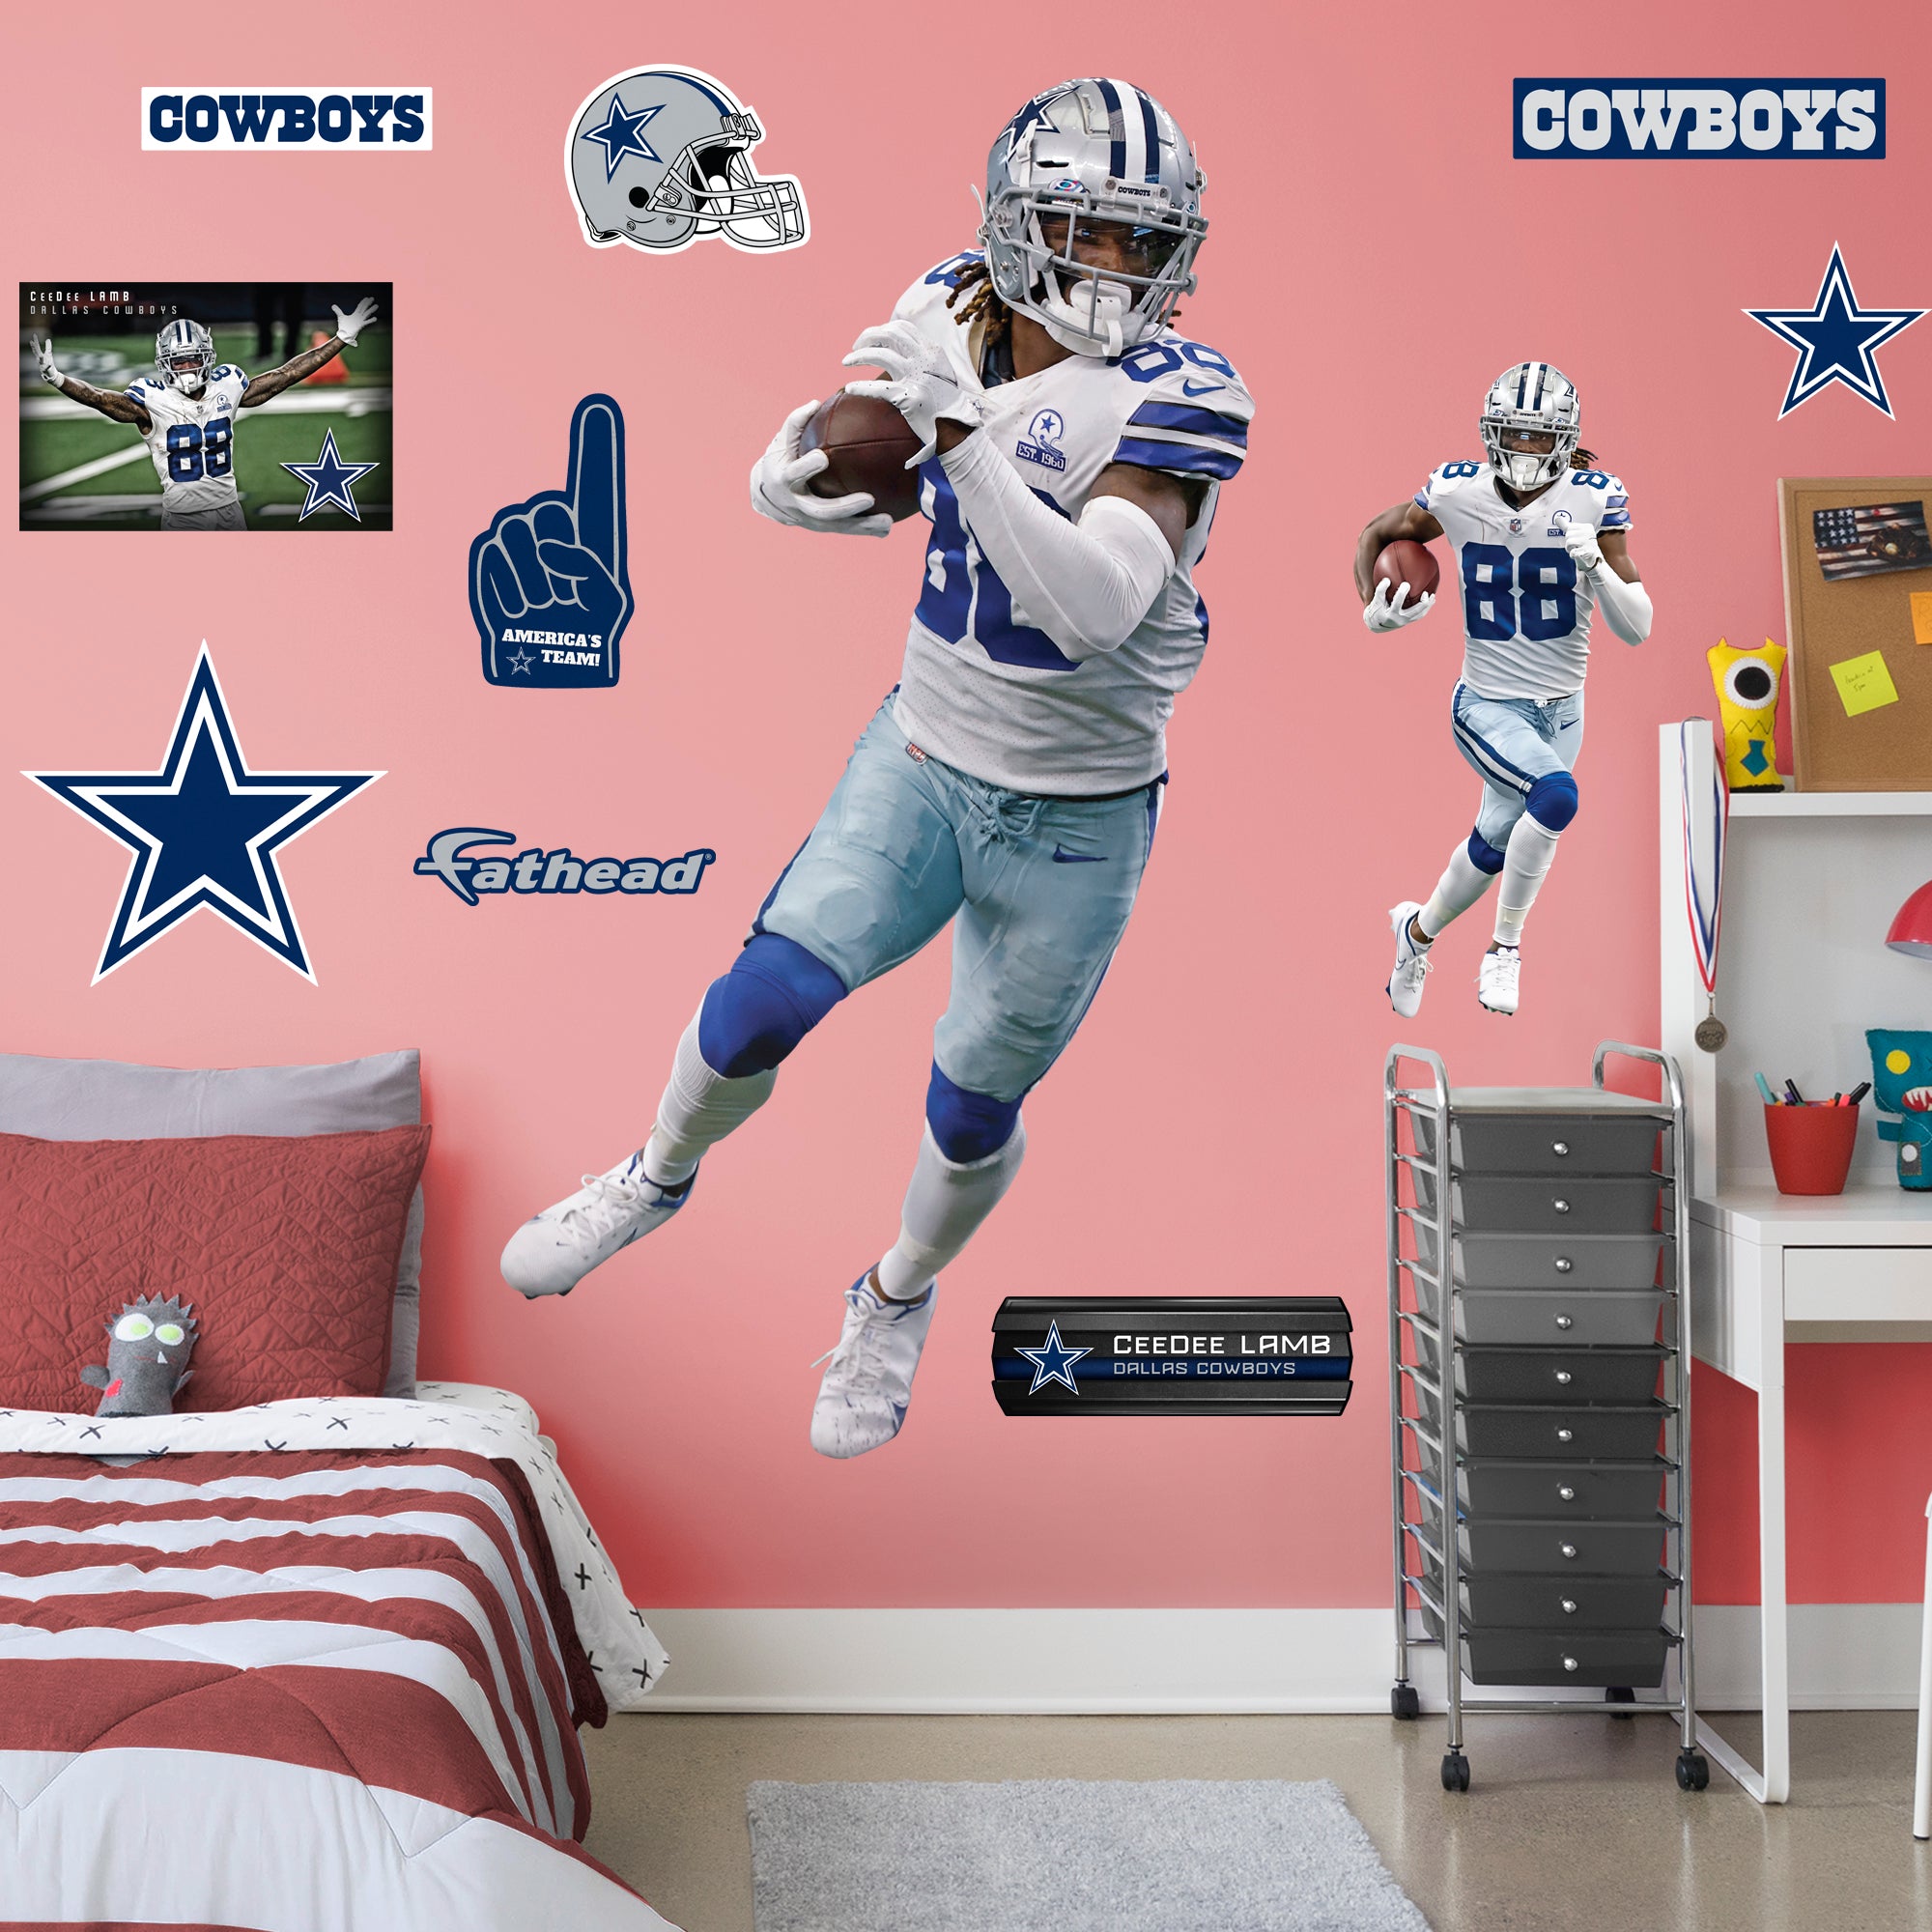 CeeDee Lamb 2020 - Officially Licensed NFL Removable Wall Decal Giant Athlete + 2 Decals by Fathead | Vinyl